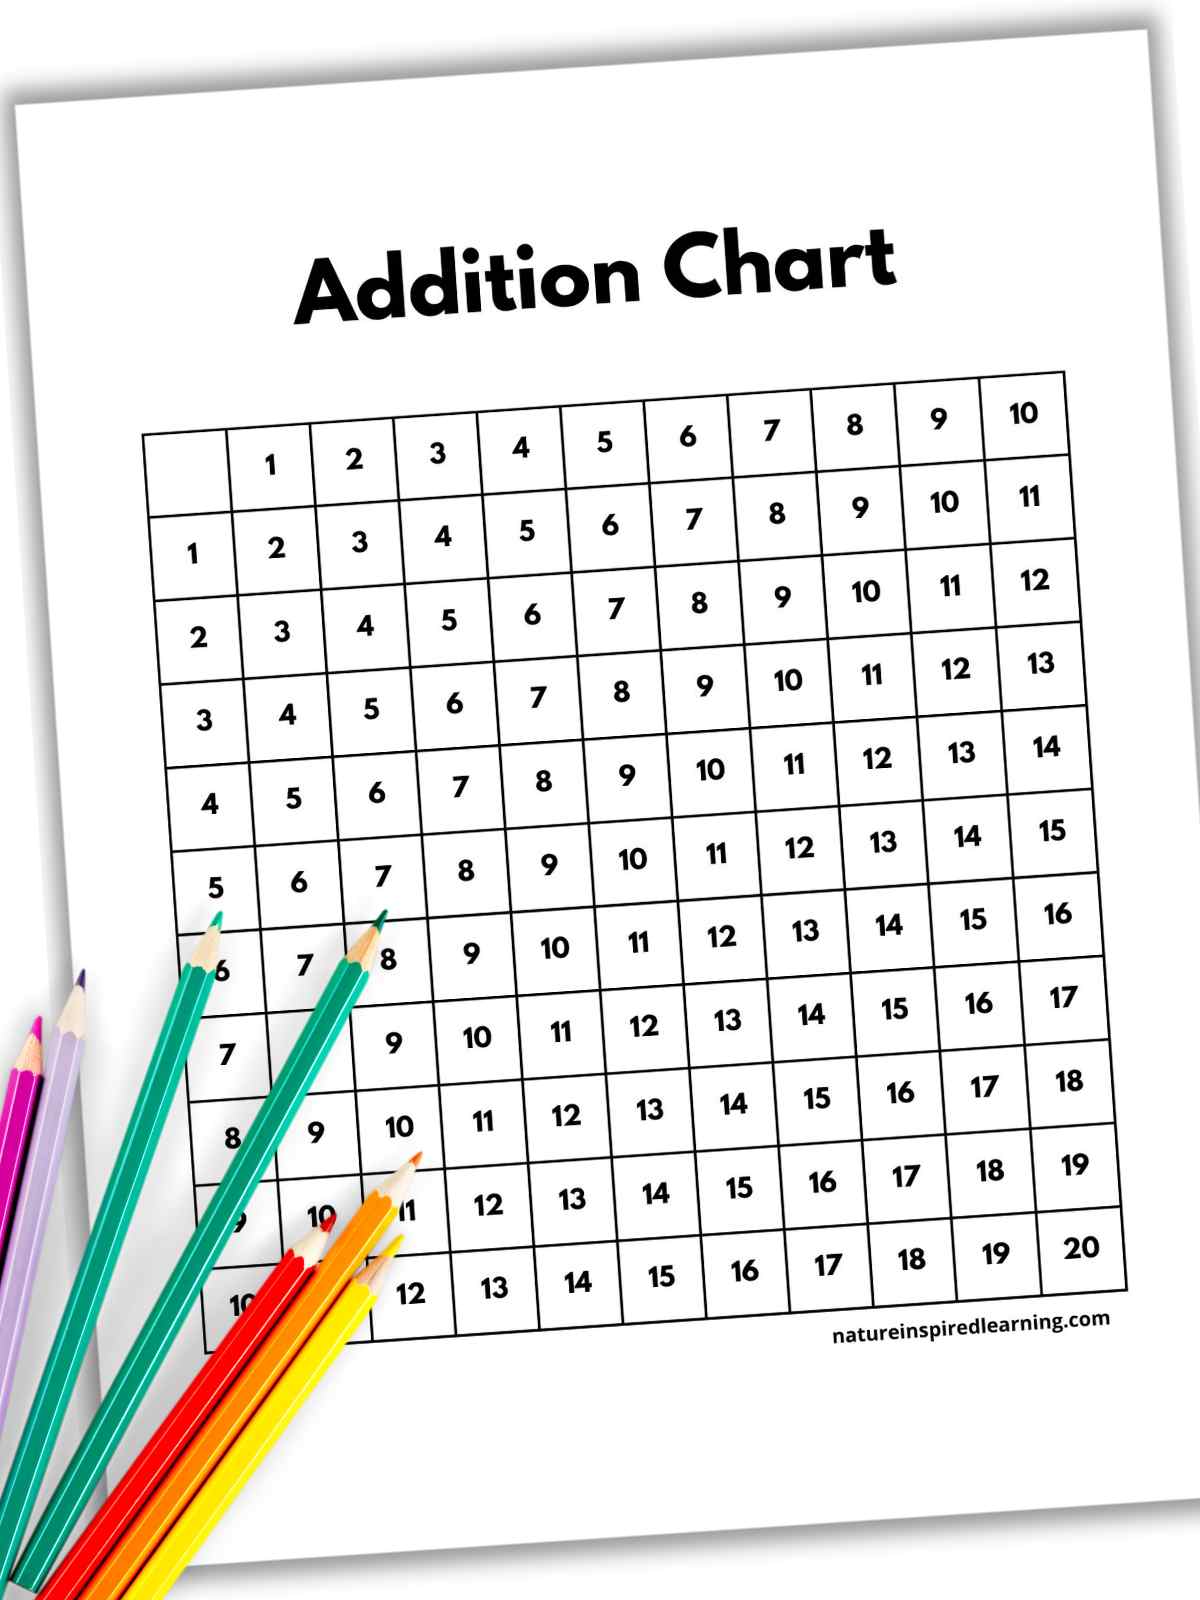 Black and white addition chart filled out with numbers 1-10 slanted with a drop shadow with colored pencils bottom left on top of the printable